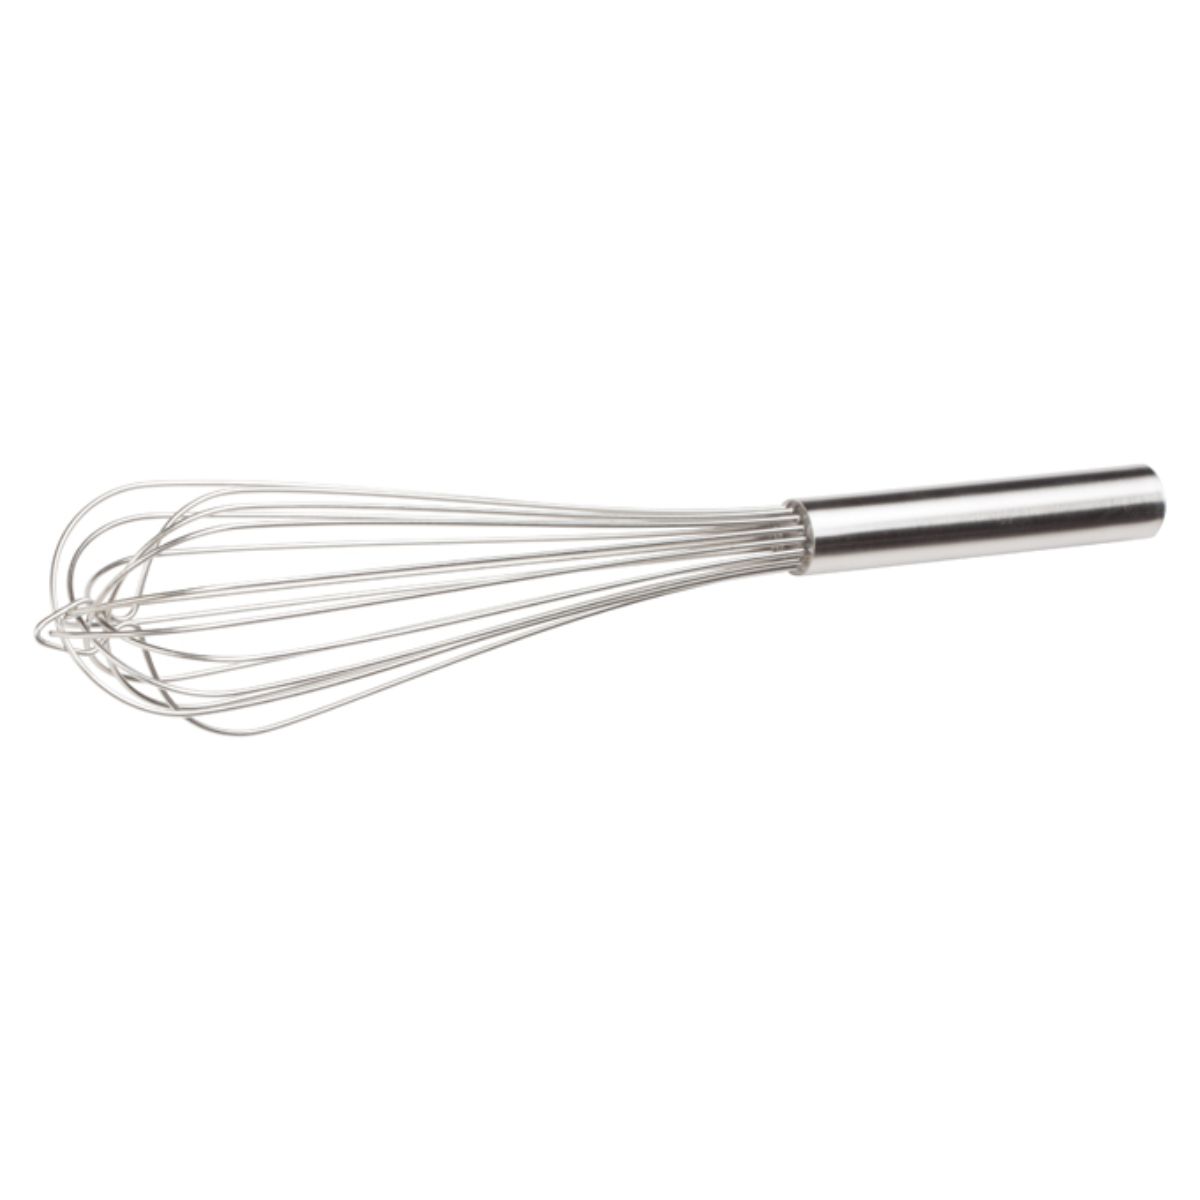 Winco Stainless Steel French Whip, 16"